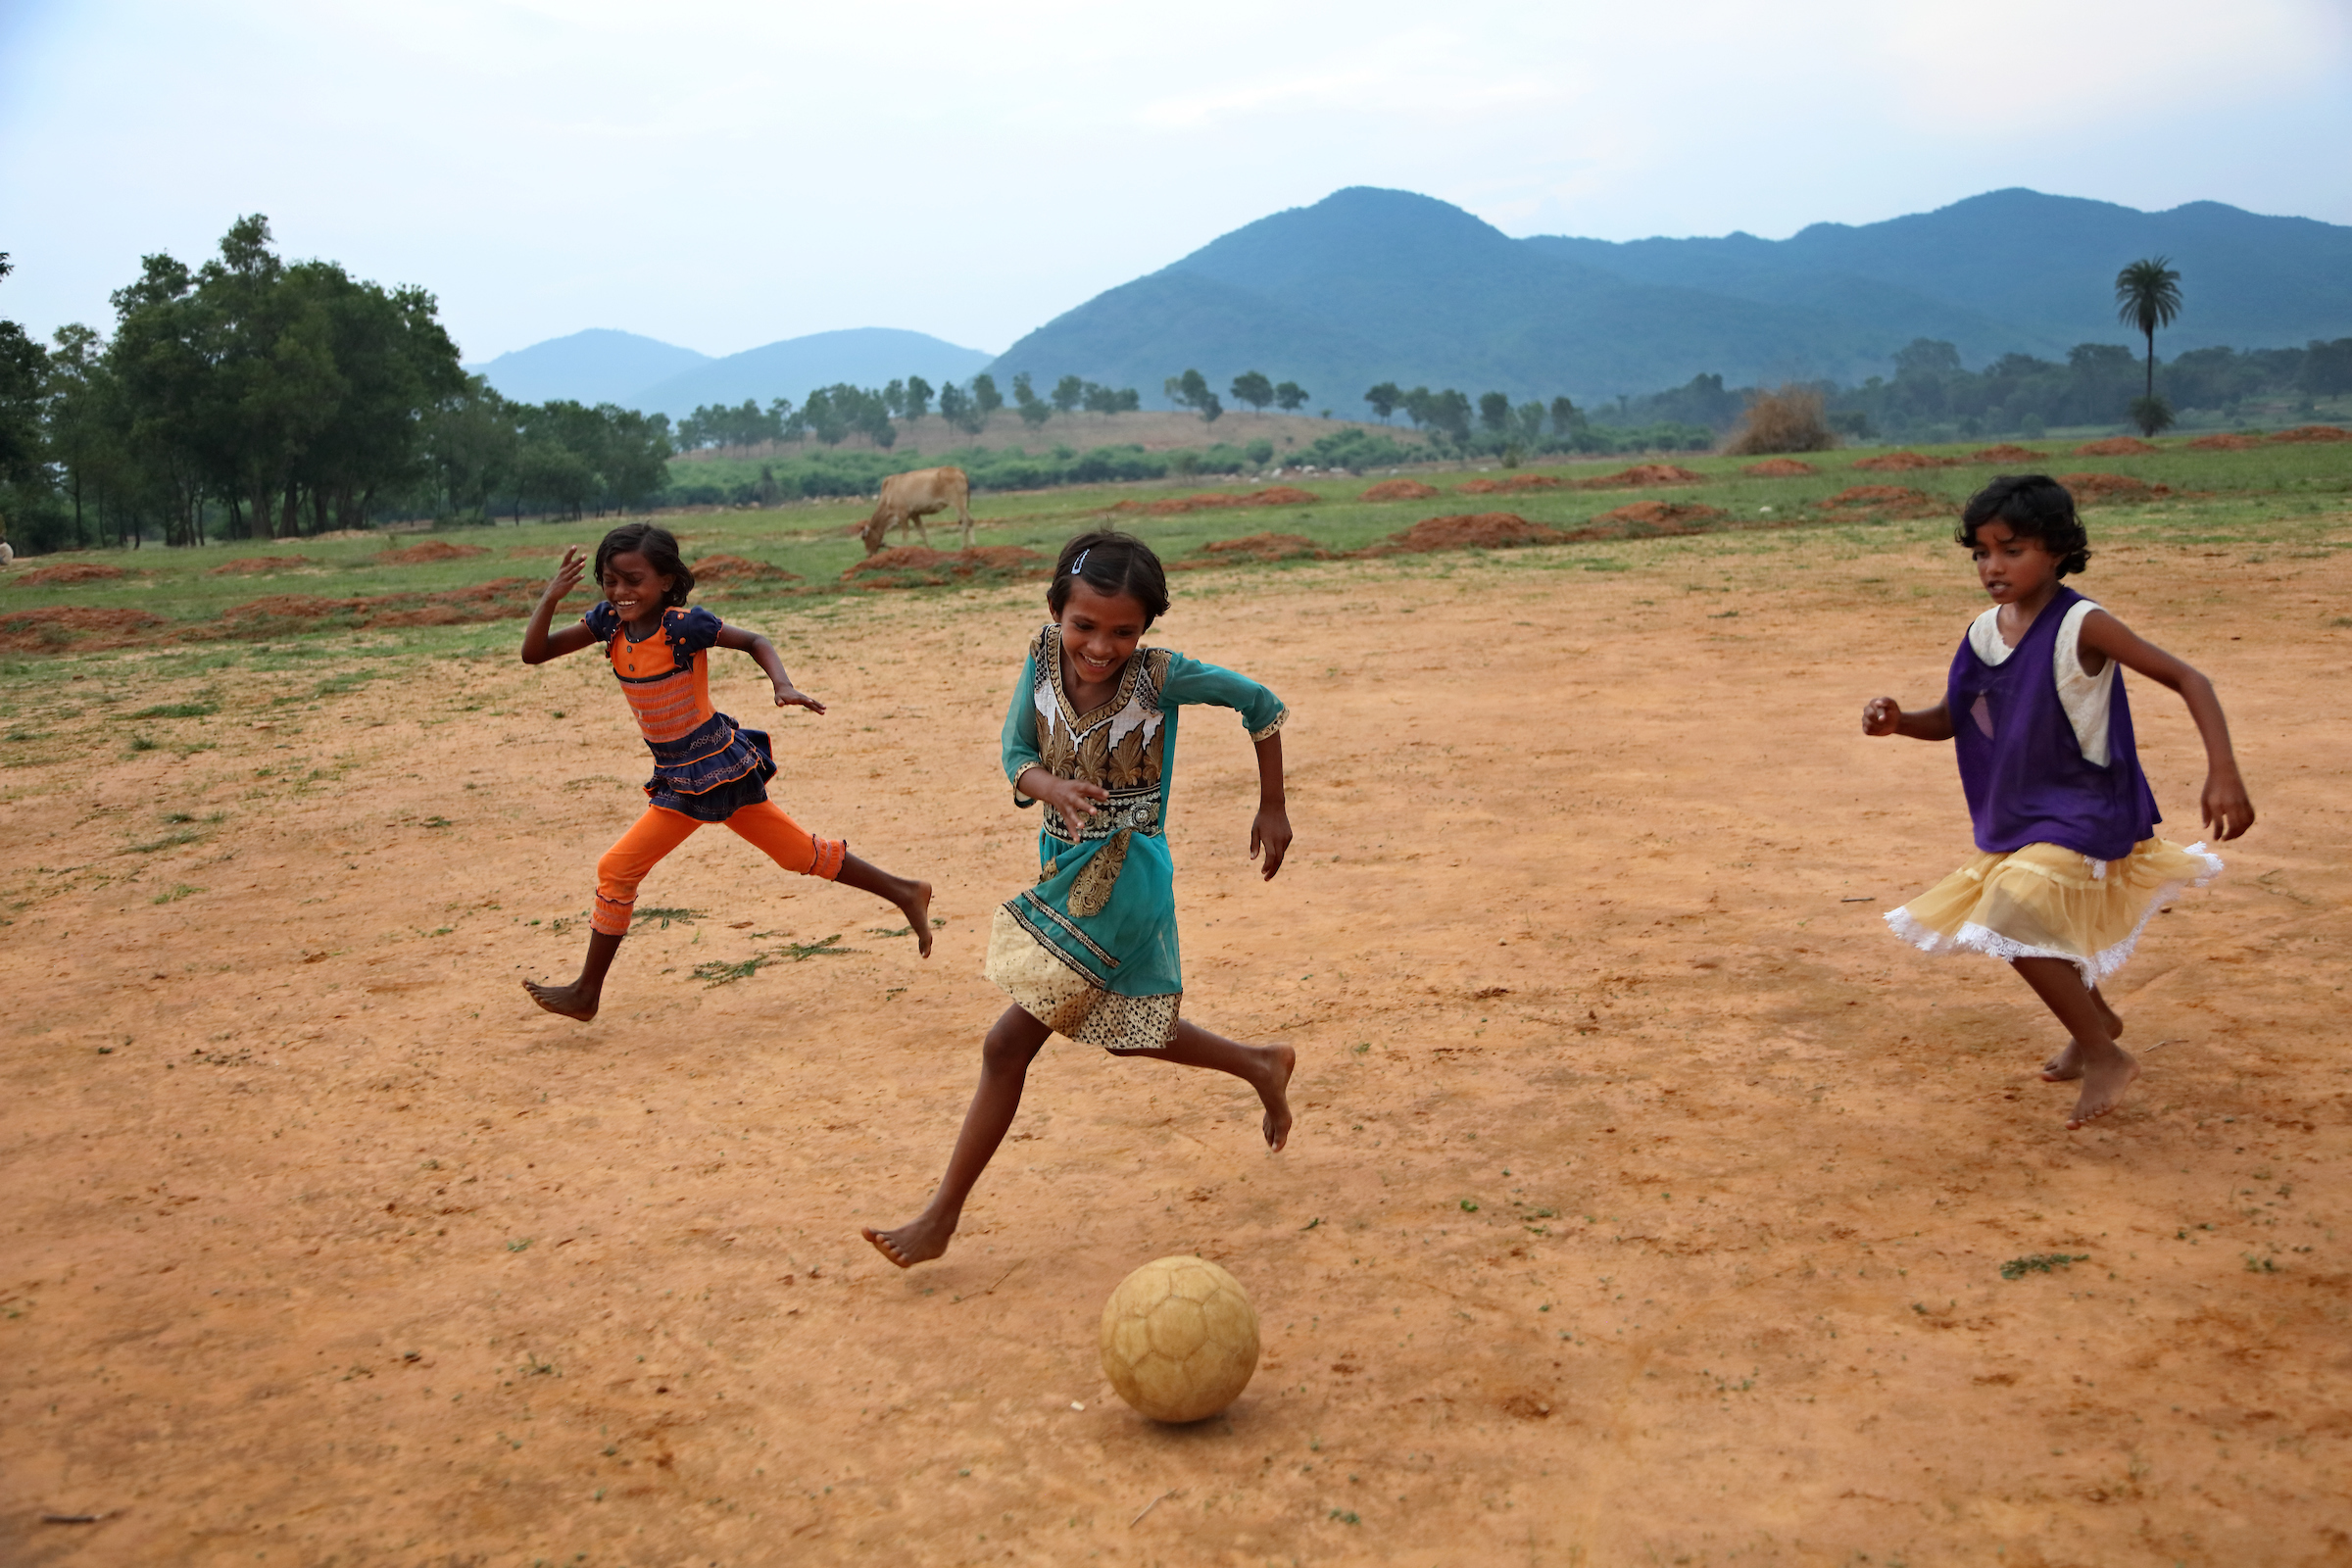 Girls enthusiastically participate in football practice after school as part of a program created by the nonprofit organization Yuwa India in Jharkhand